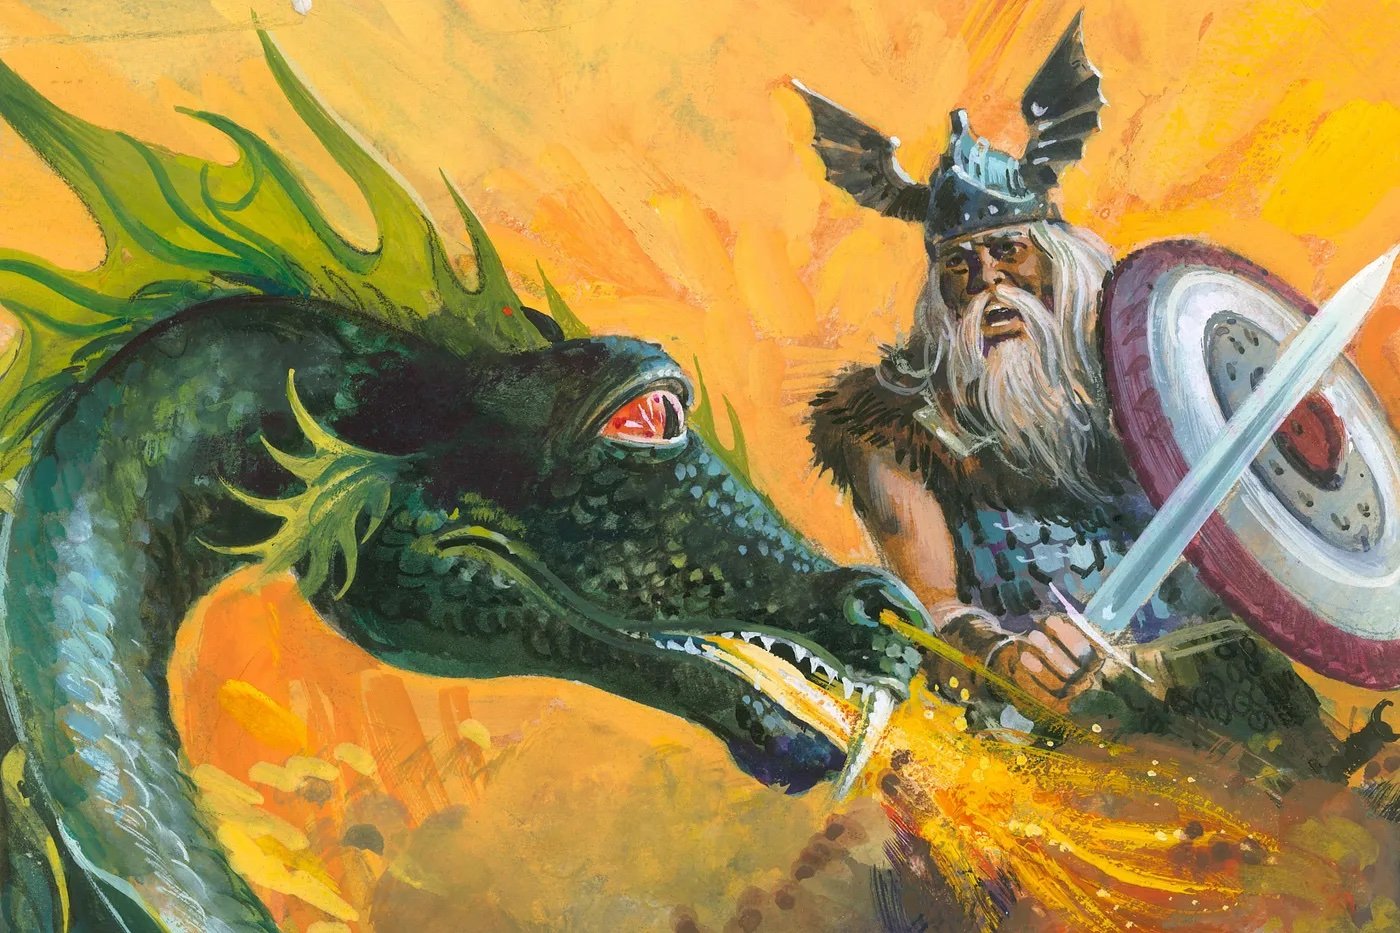 Prince Beowulf fighting a dragon, a sword and shield in his hands and a winged helmet on his head. The dragon is breathing fire.